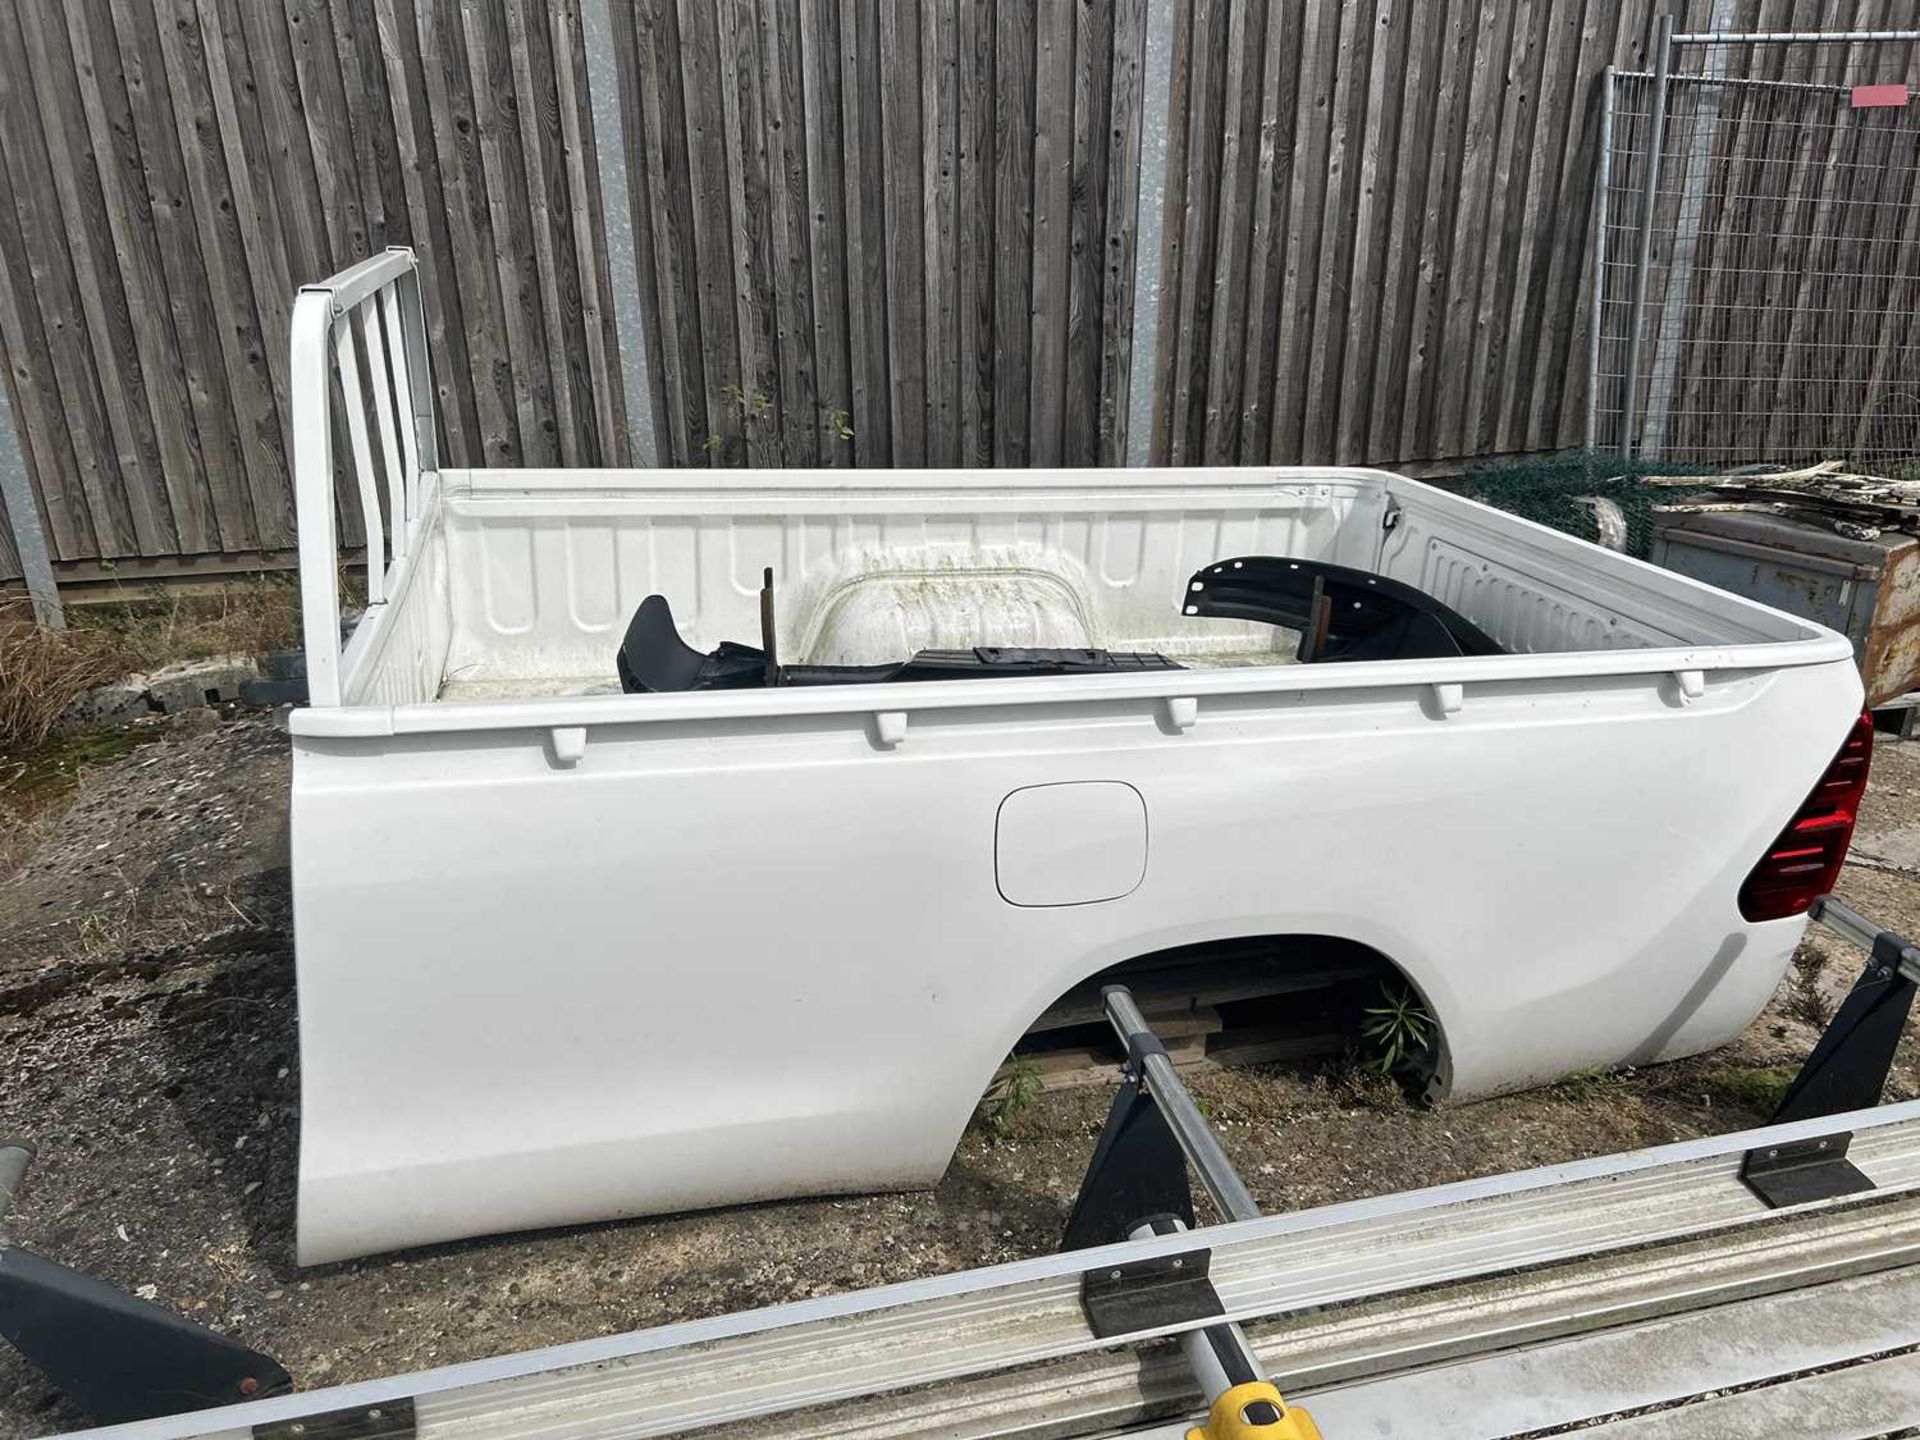 Toyota Hilux bed